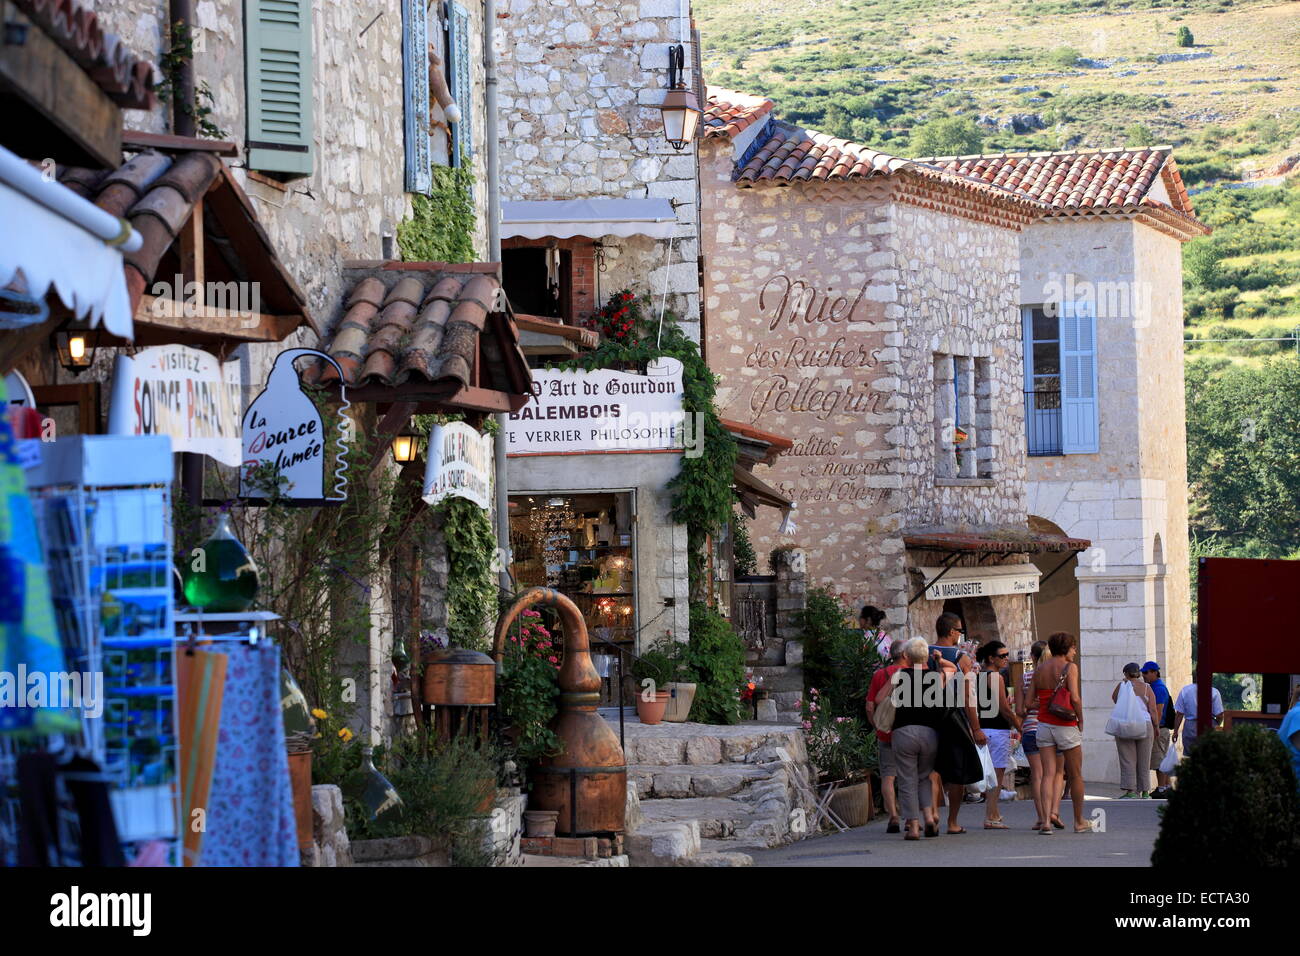 The picturesque medieval perched village of Gourdon on the French Riviera. Stock Photo